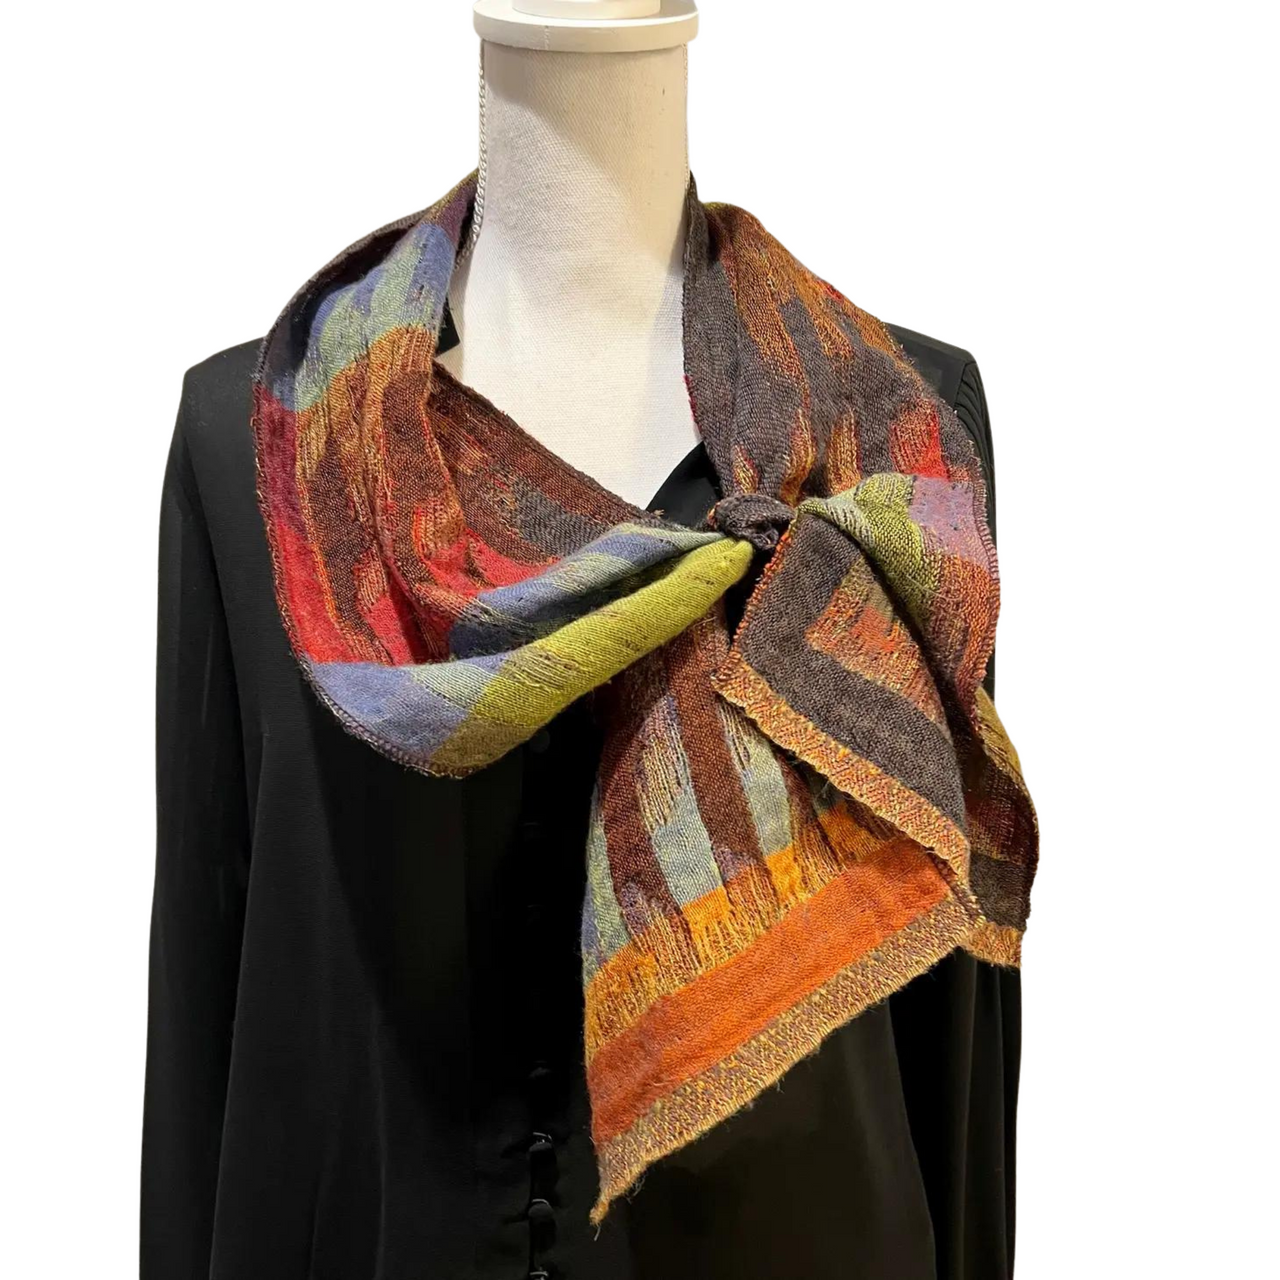 In Style: Neck Scarf